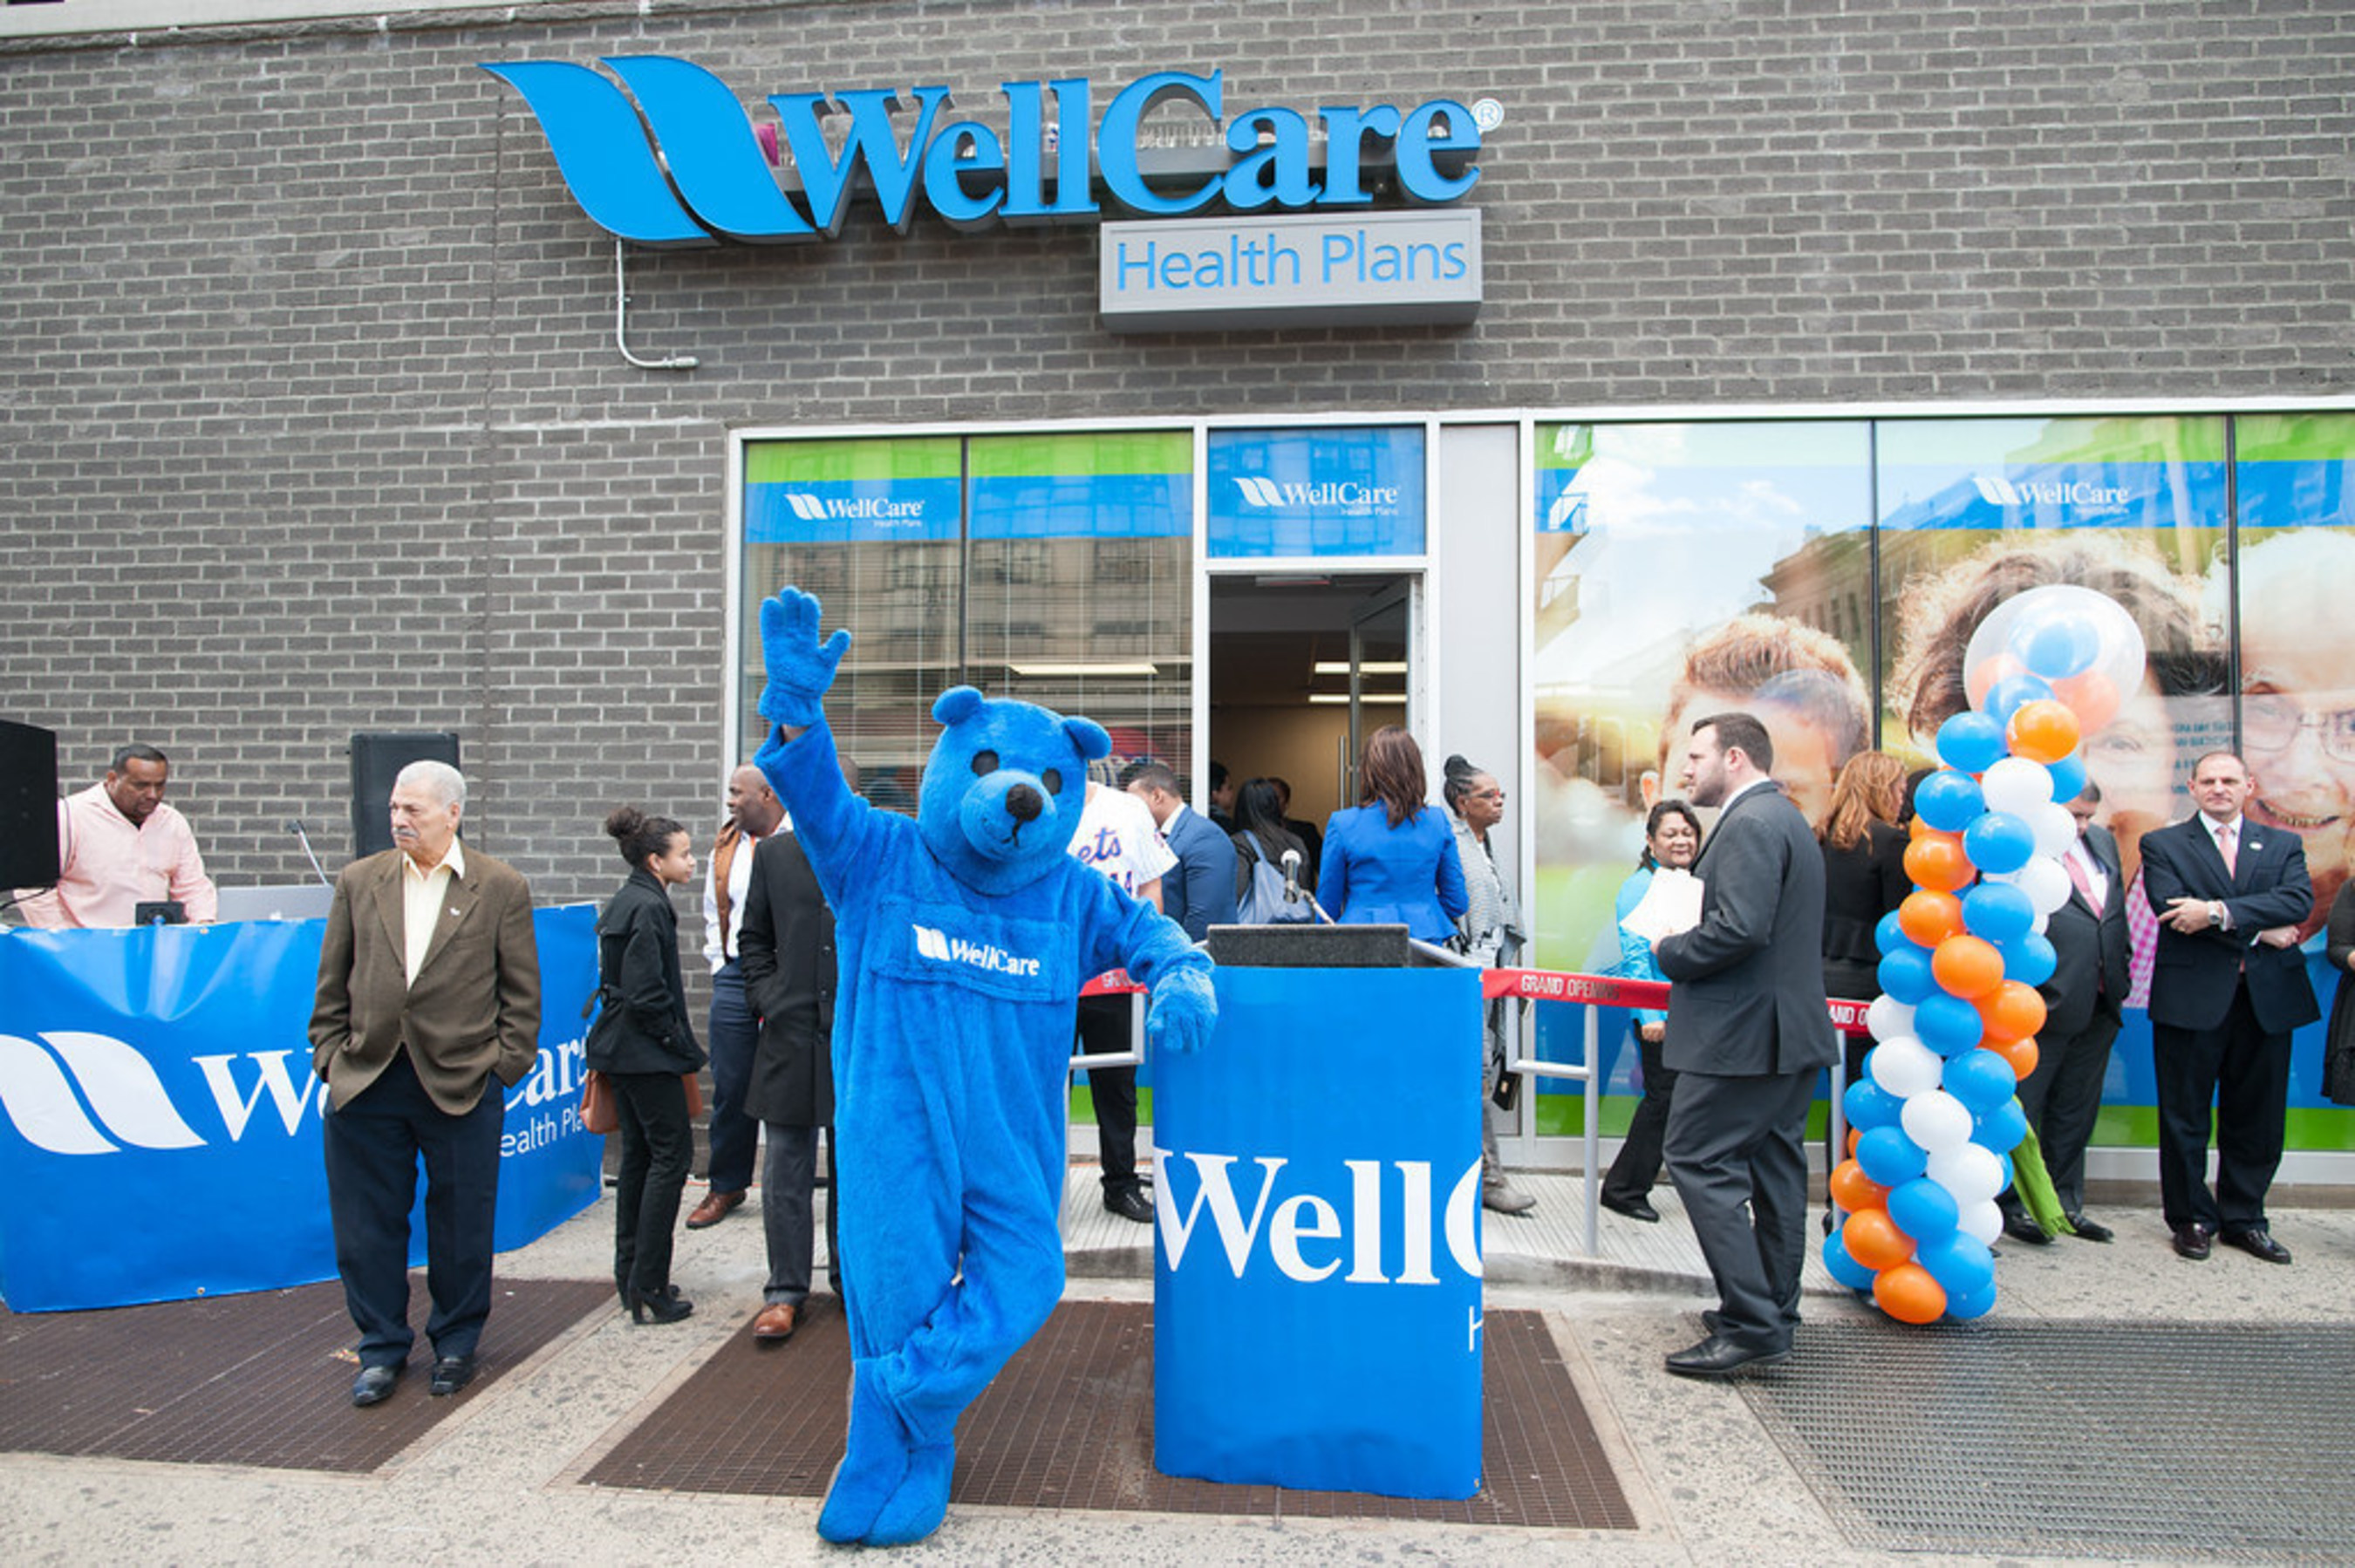 Blu, WellCare of New York's mascot, strikes a post outside WellCare's newest Welcome Center at 1365 Saint Nicholas Avenue in Manhattan's Washington Heights. WellCare Welcome Centers are neighborhood health information, education and activity centers.